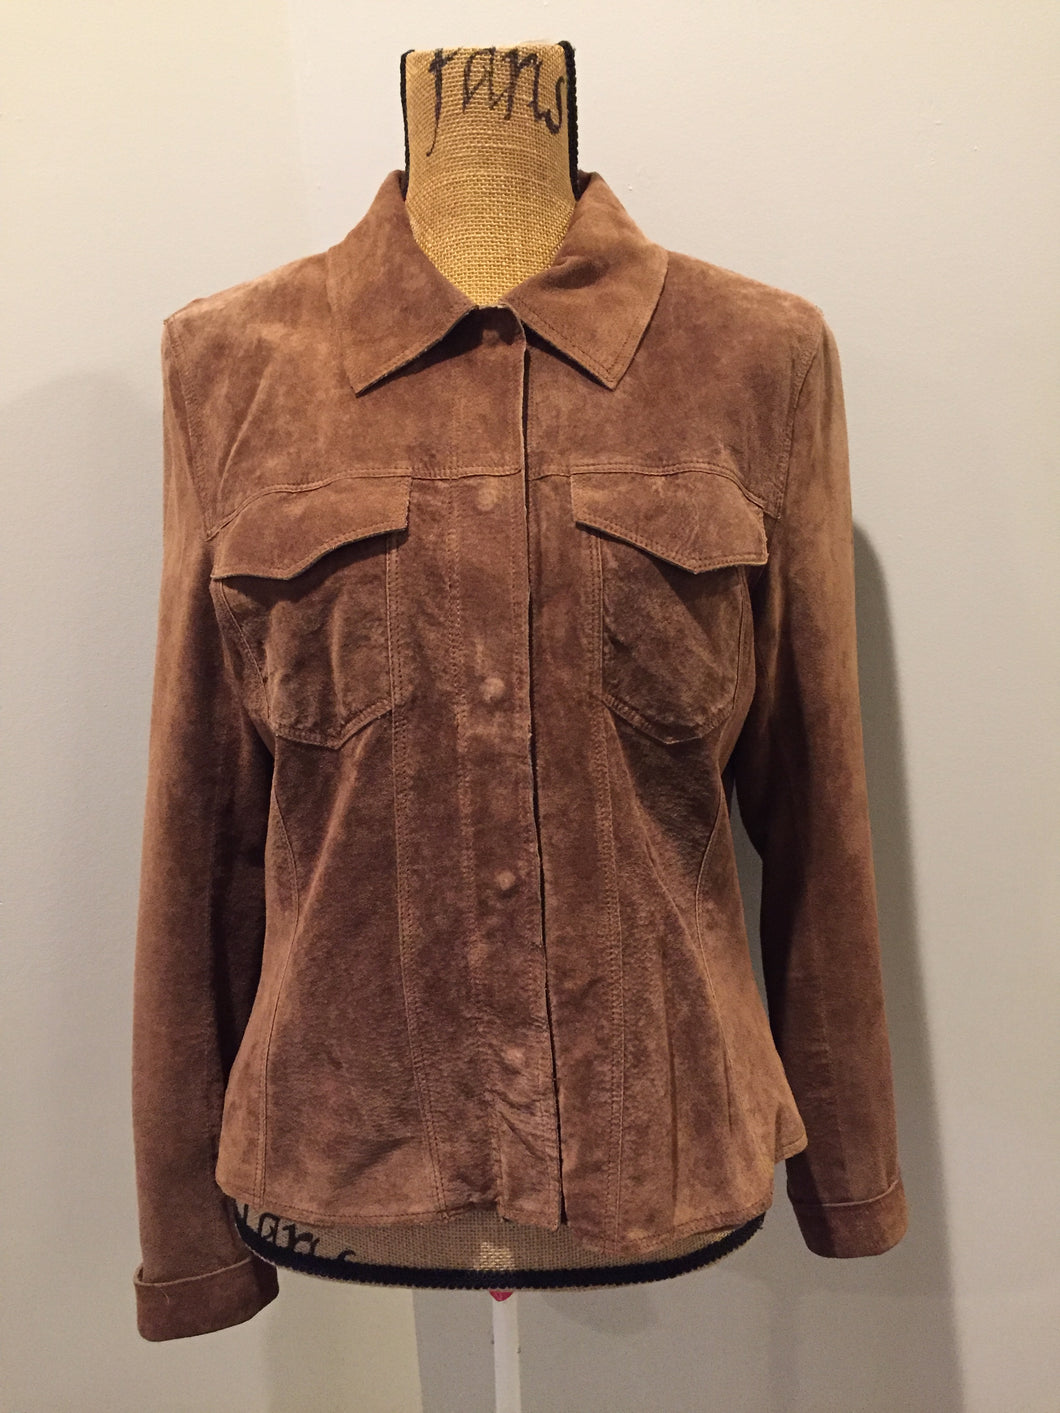 Kingspier Vintage - Danier brown suede jacket with snap closures, two flap pockets on the chest and cuffed sleeves. Size medium.